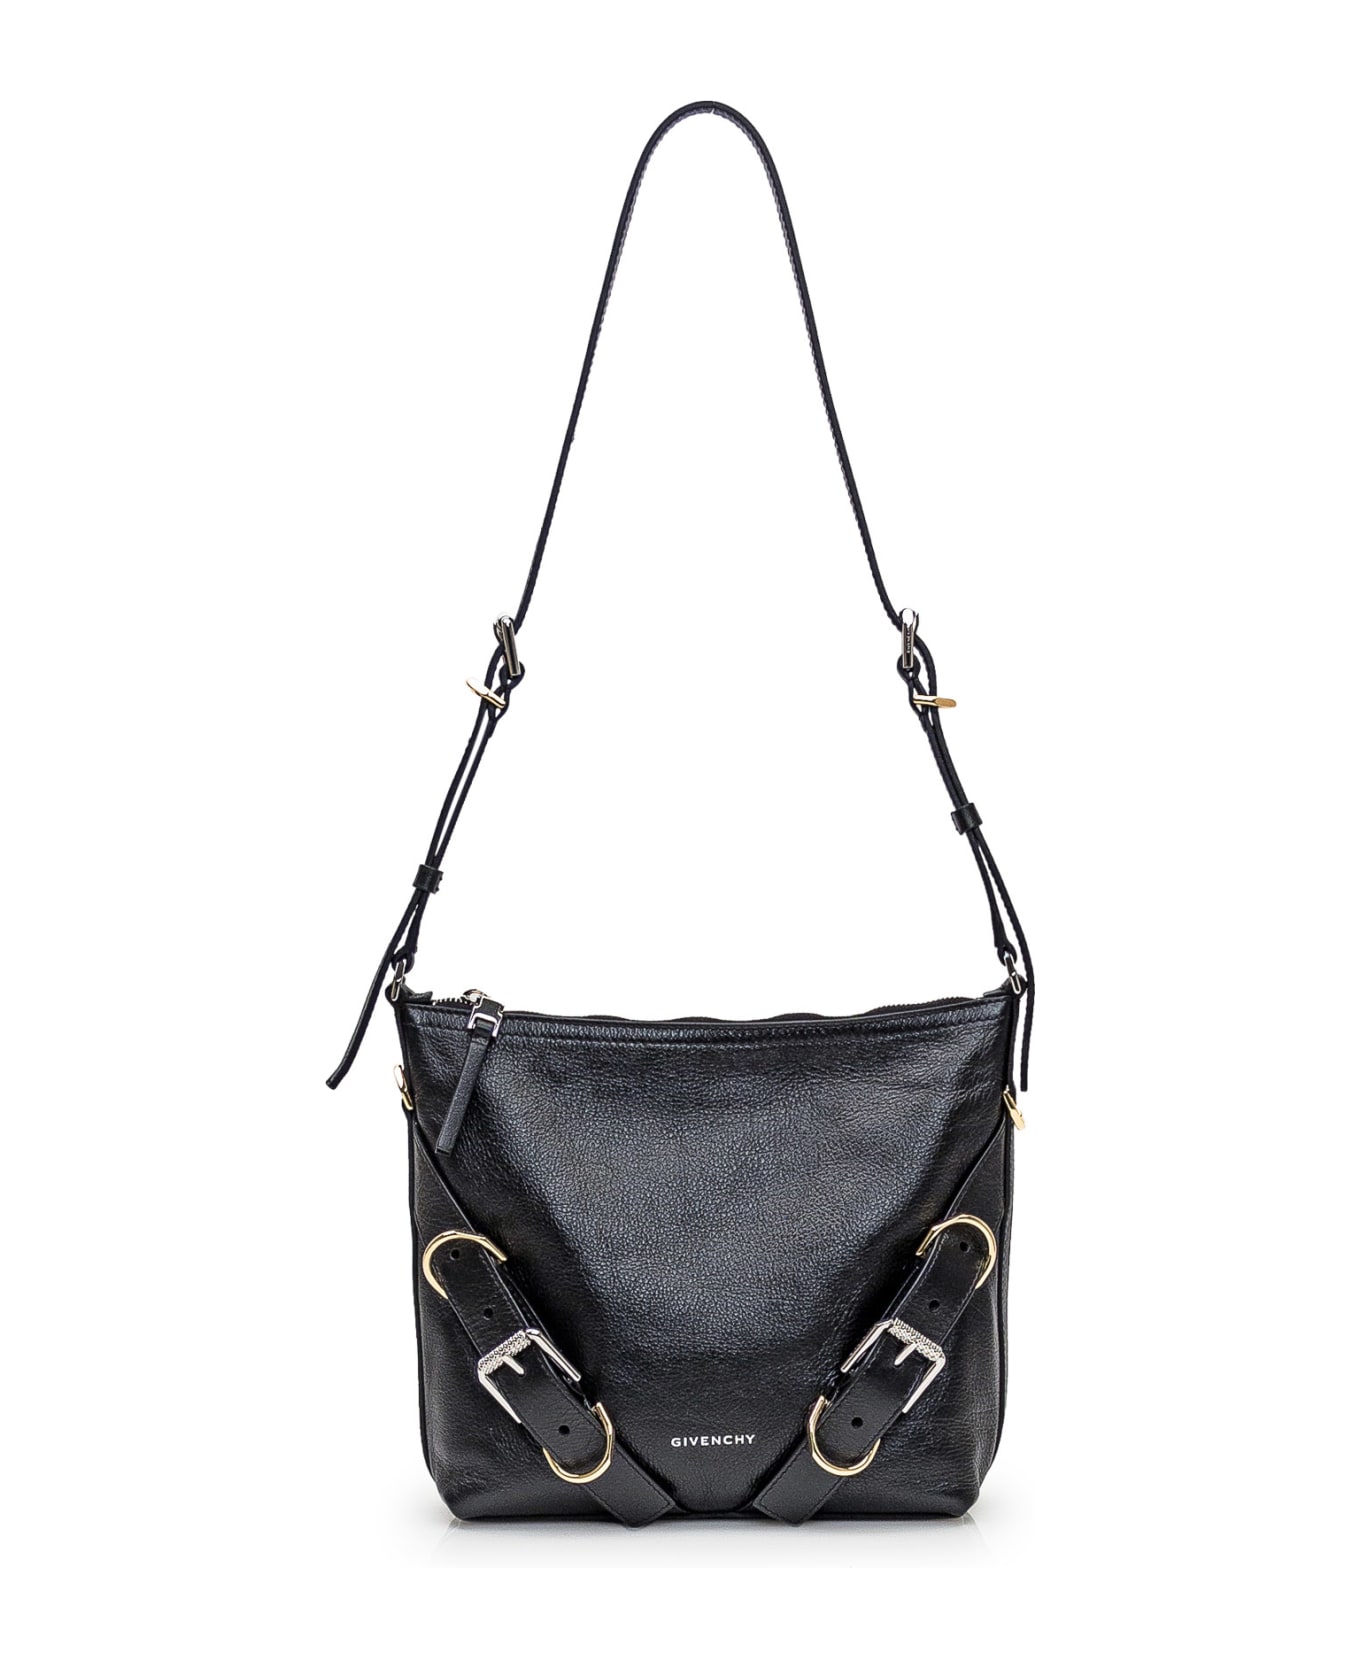 Givenchy Voyou Leather Crossbody Bag - BLACK ショルダーバッグ